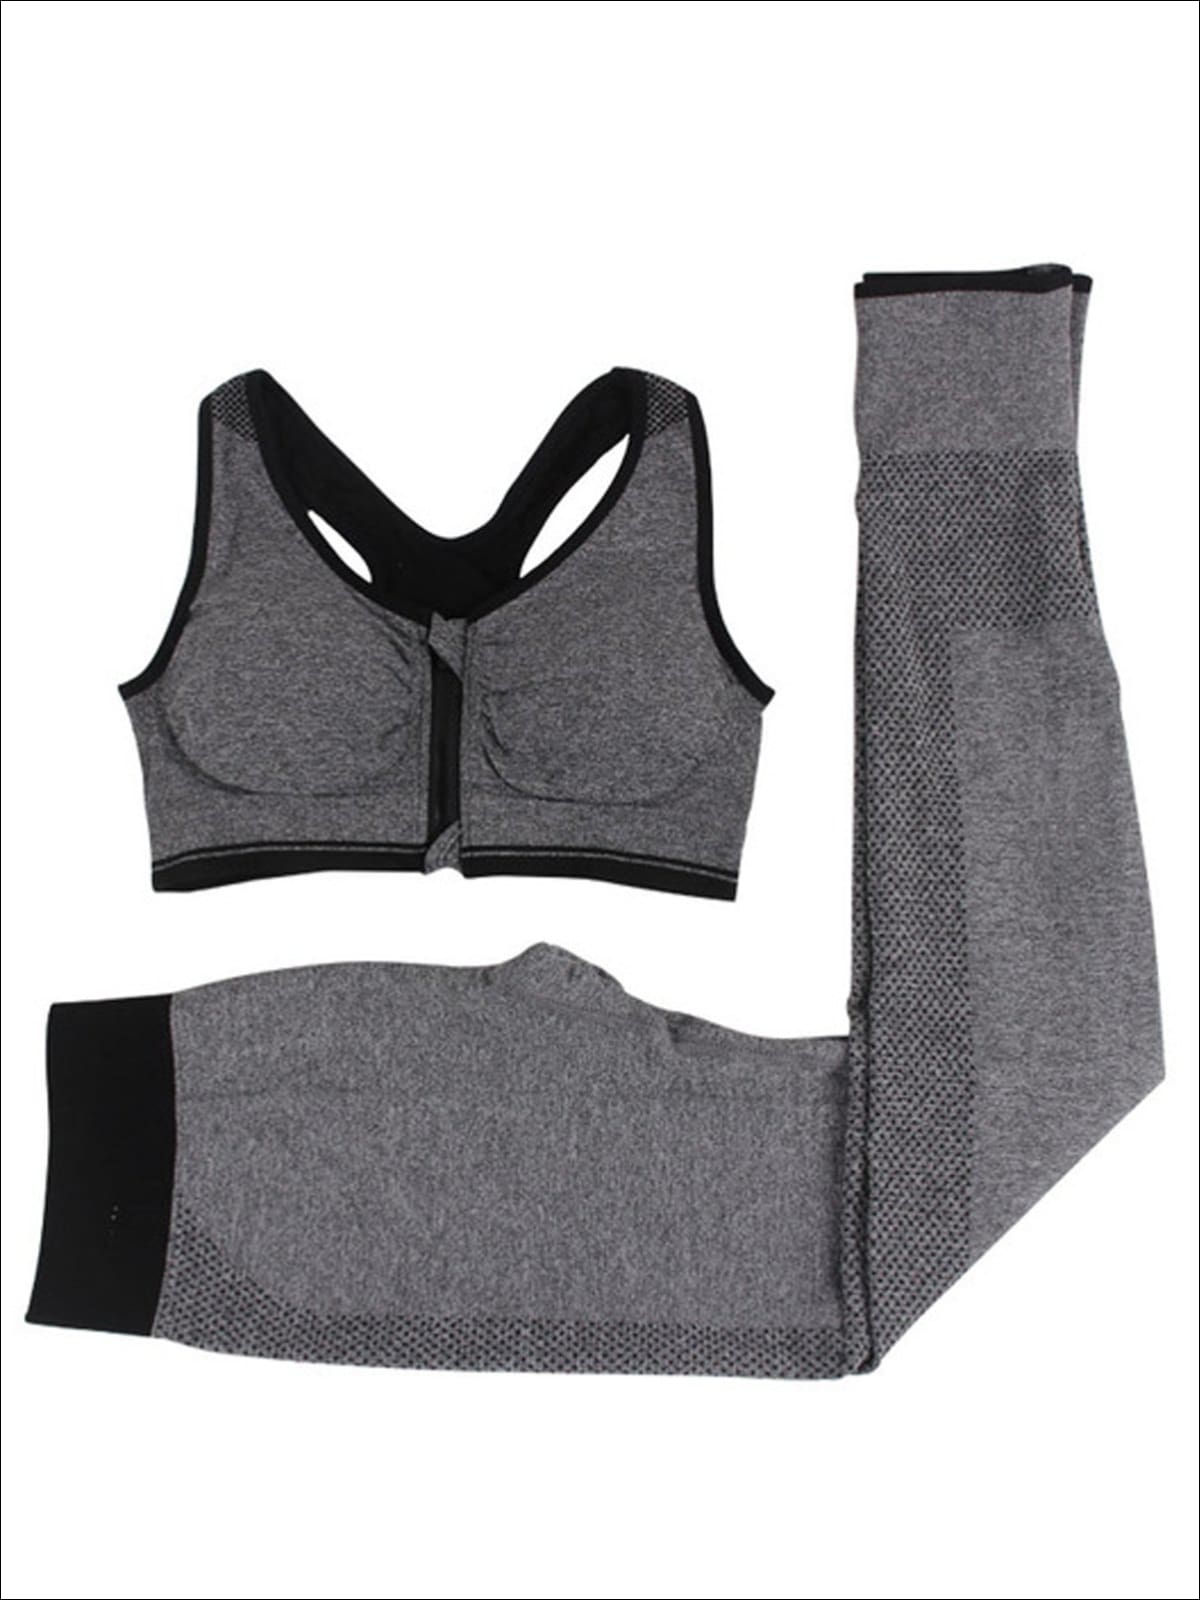 https://cdn.shopify.com/s/files/1/0996/1812/products/womens-two-tone-seamless-sports-bra-perforated-leggings-set-4-style-options-grey-zip-up-s-20-39-99-40-59-bfcutoff-black-dropified-activewear-mia-belle-overseas_958.jpg?v=1577277921